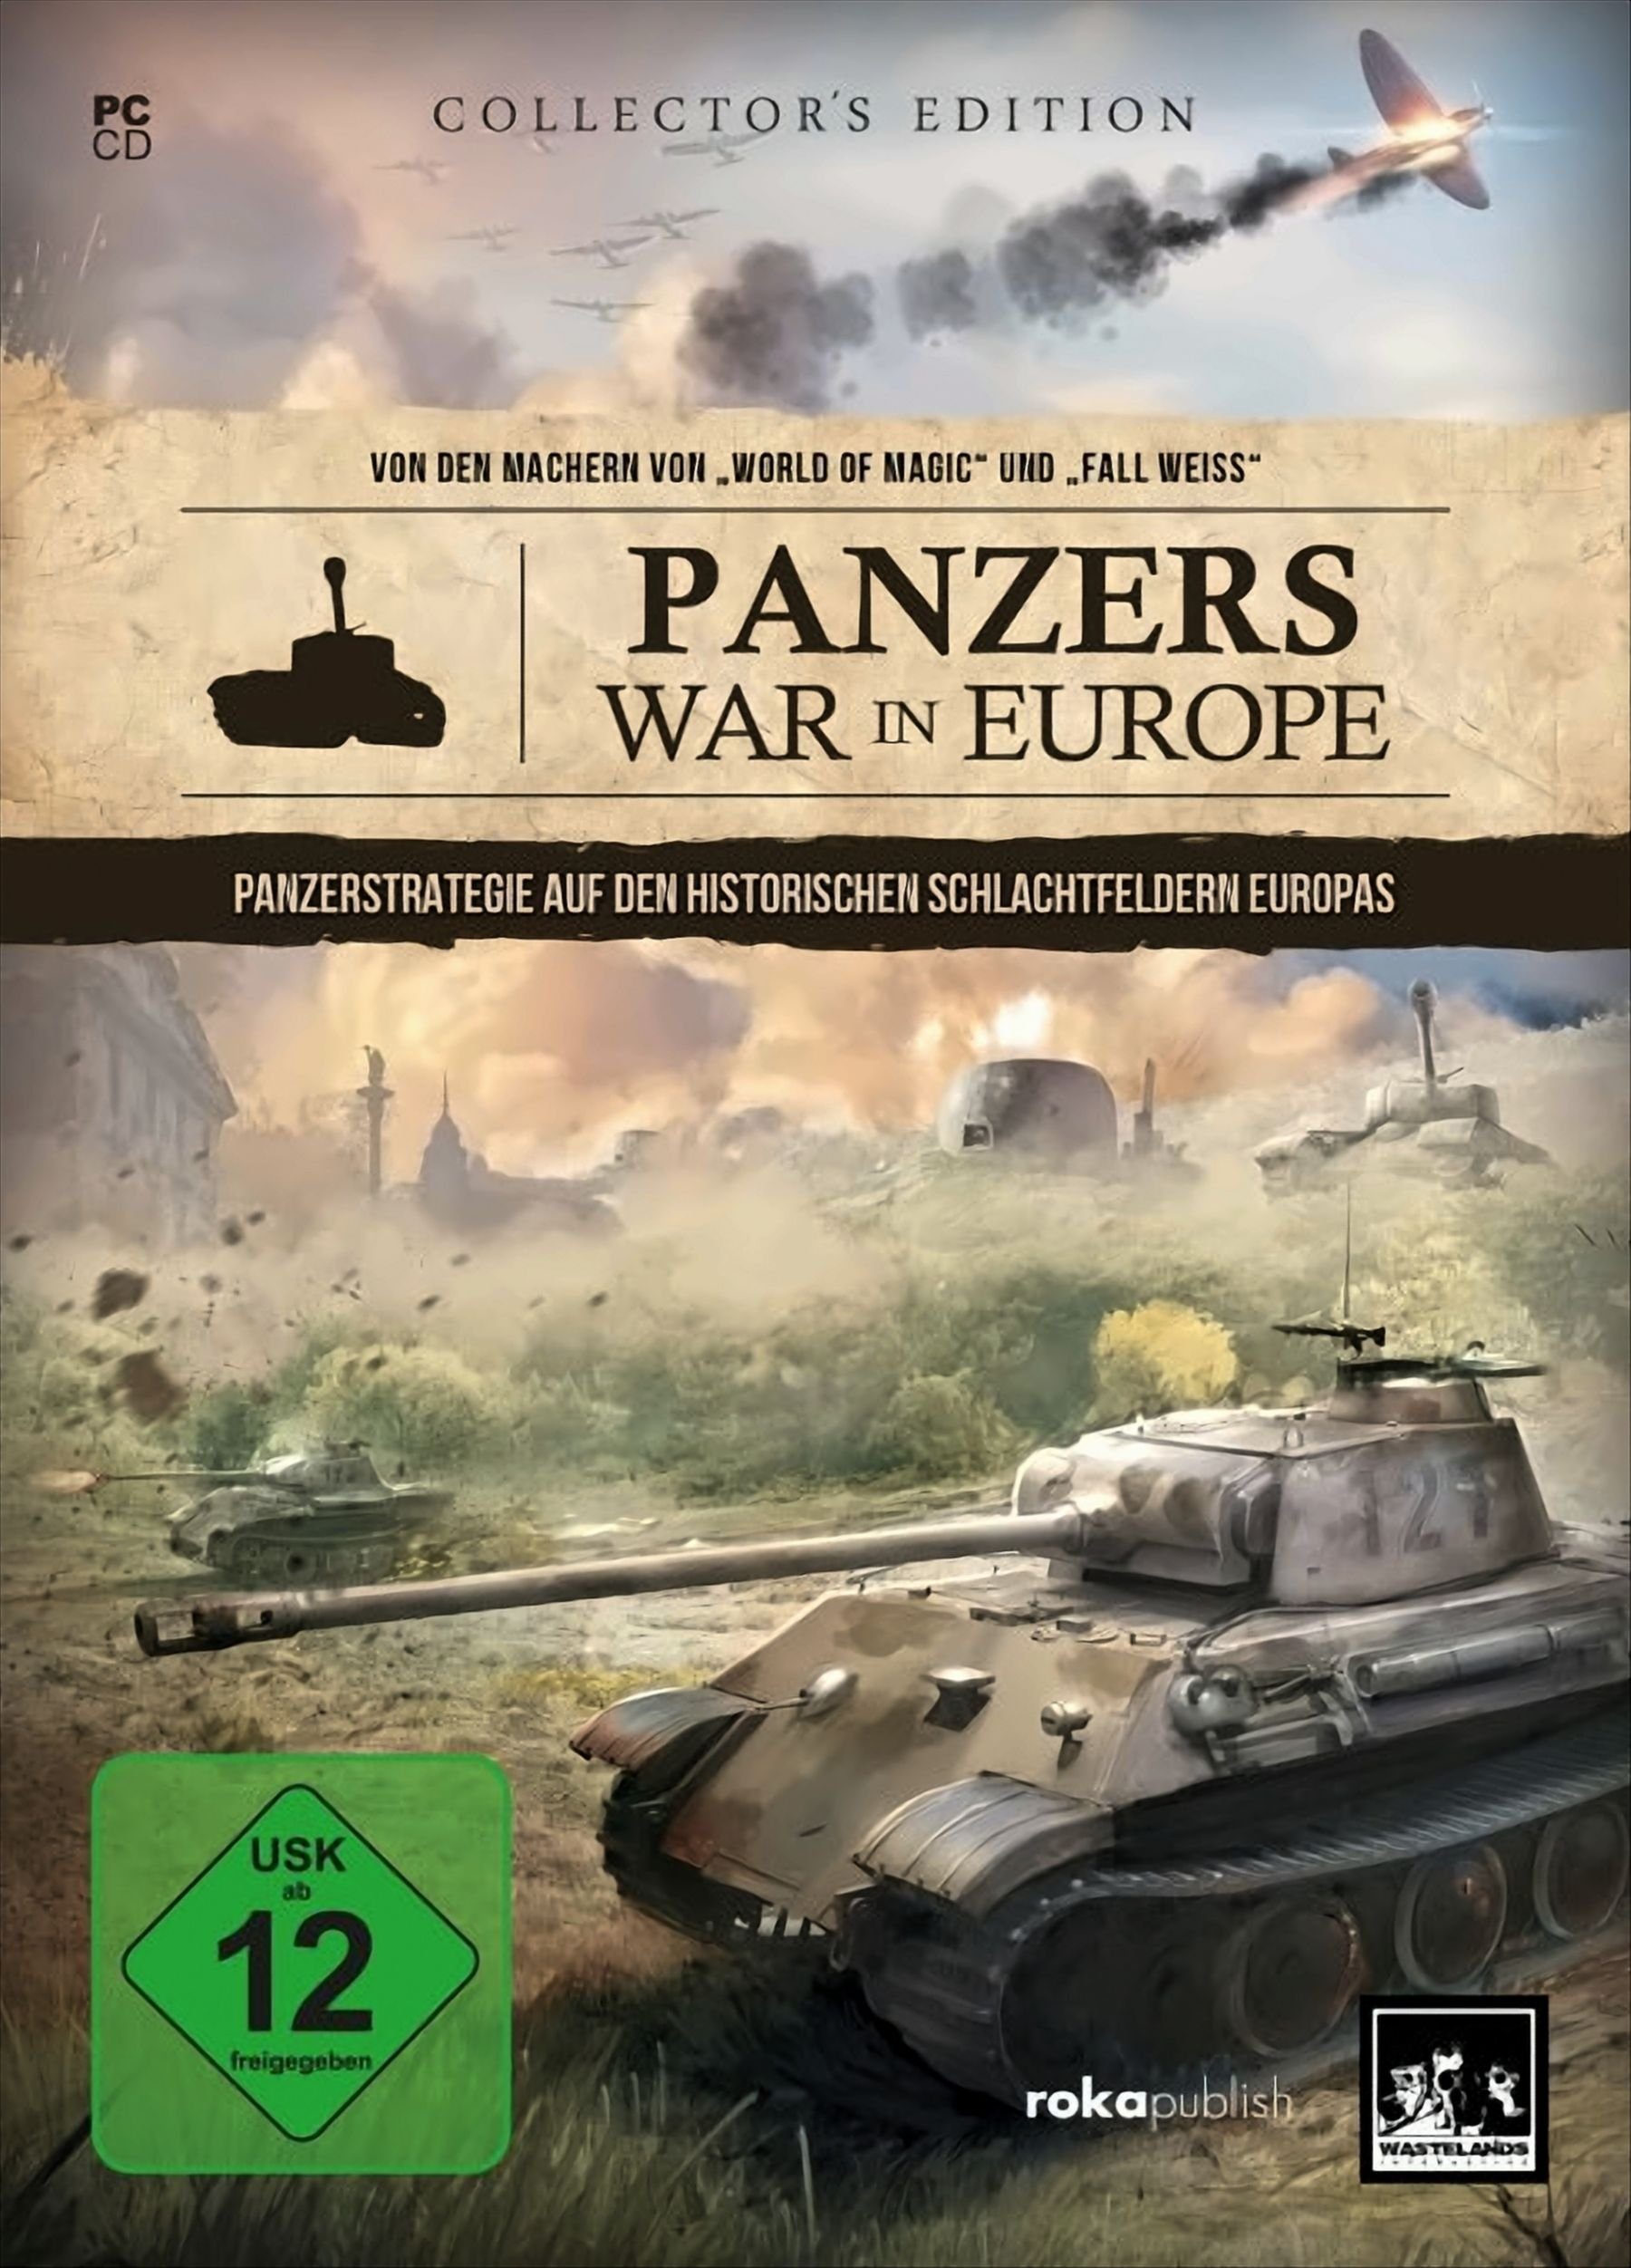 Panzers - War in Europe (Collector's Edition) PC